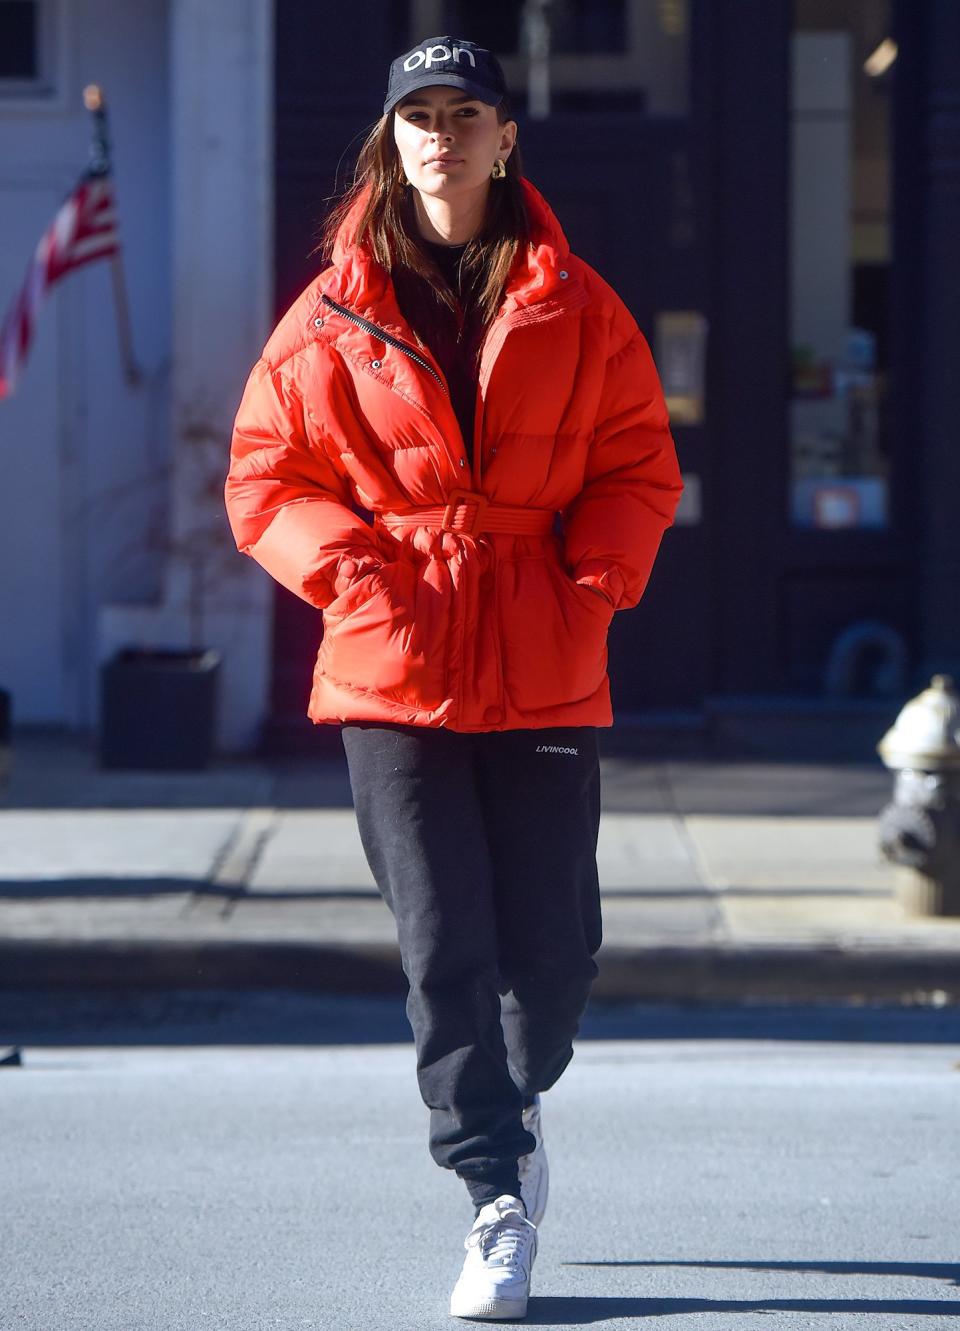 Emily Ratajkowski bundles up in a red coat while out and about in N.Y.C. on Monday. 